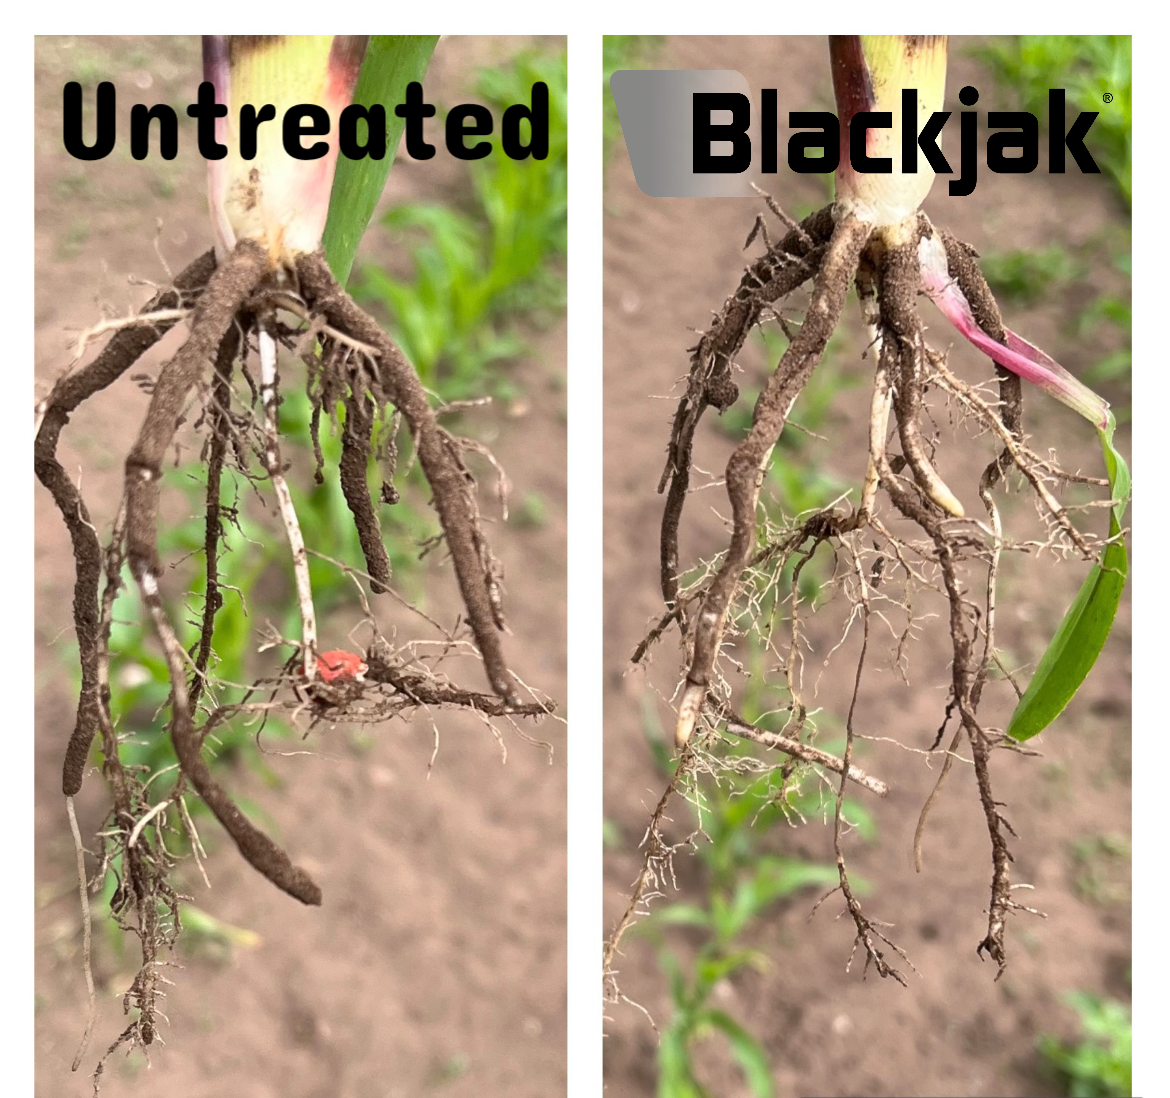 Blackjak improves rooting in maize - Sipcam UK